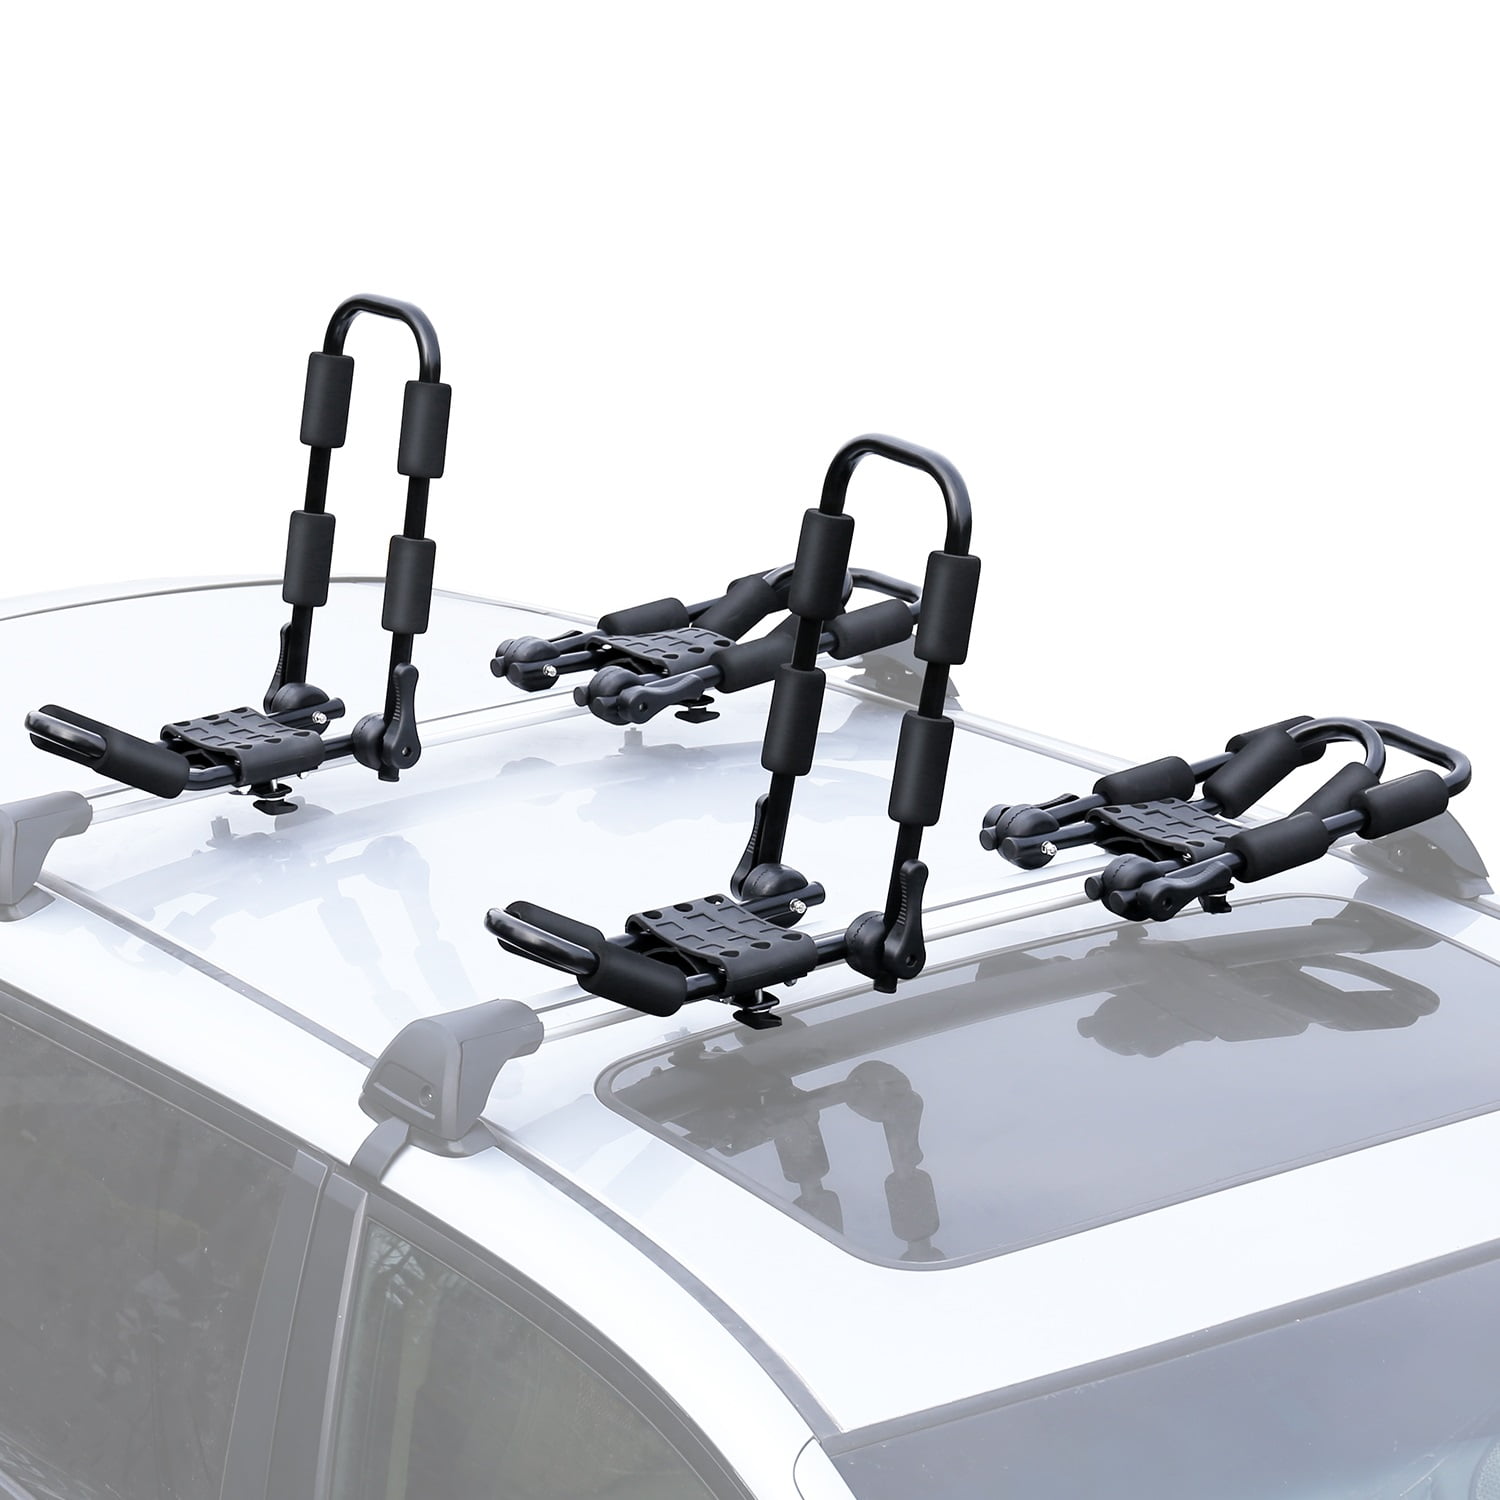 Car and Truck Crossbar with 4 pcs Tie Down Straps Leader Accessories Aluminum Folding Kayak Rack 2 PCS/Set J Bar Car Roof Rack for Canoe Surf Board SUP On Roof Top Mount on SUV 